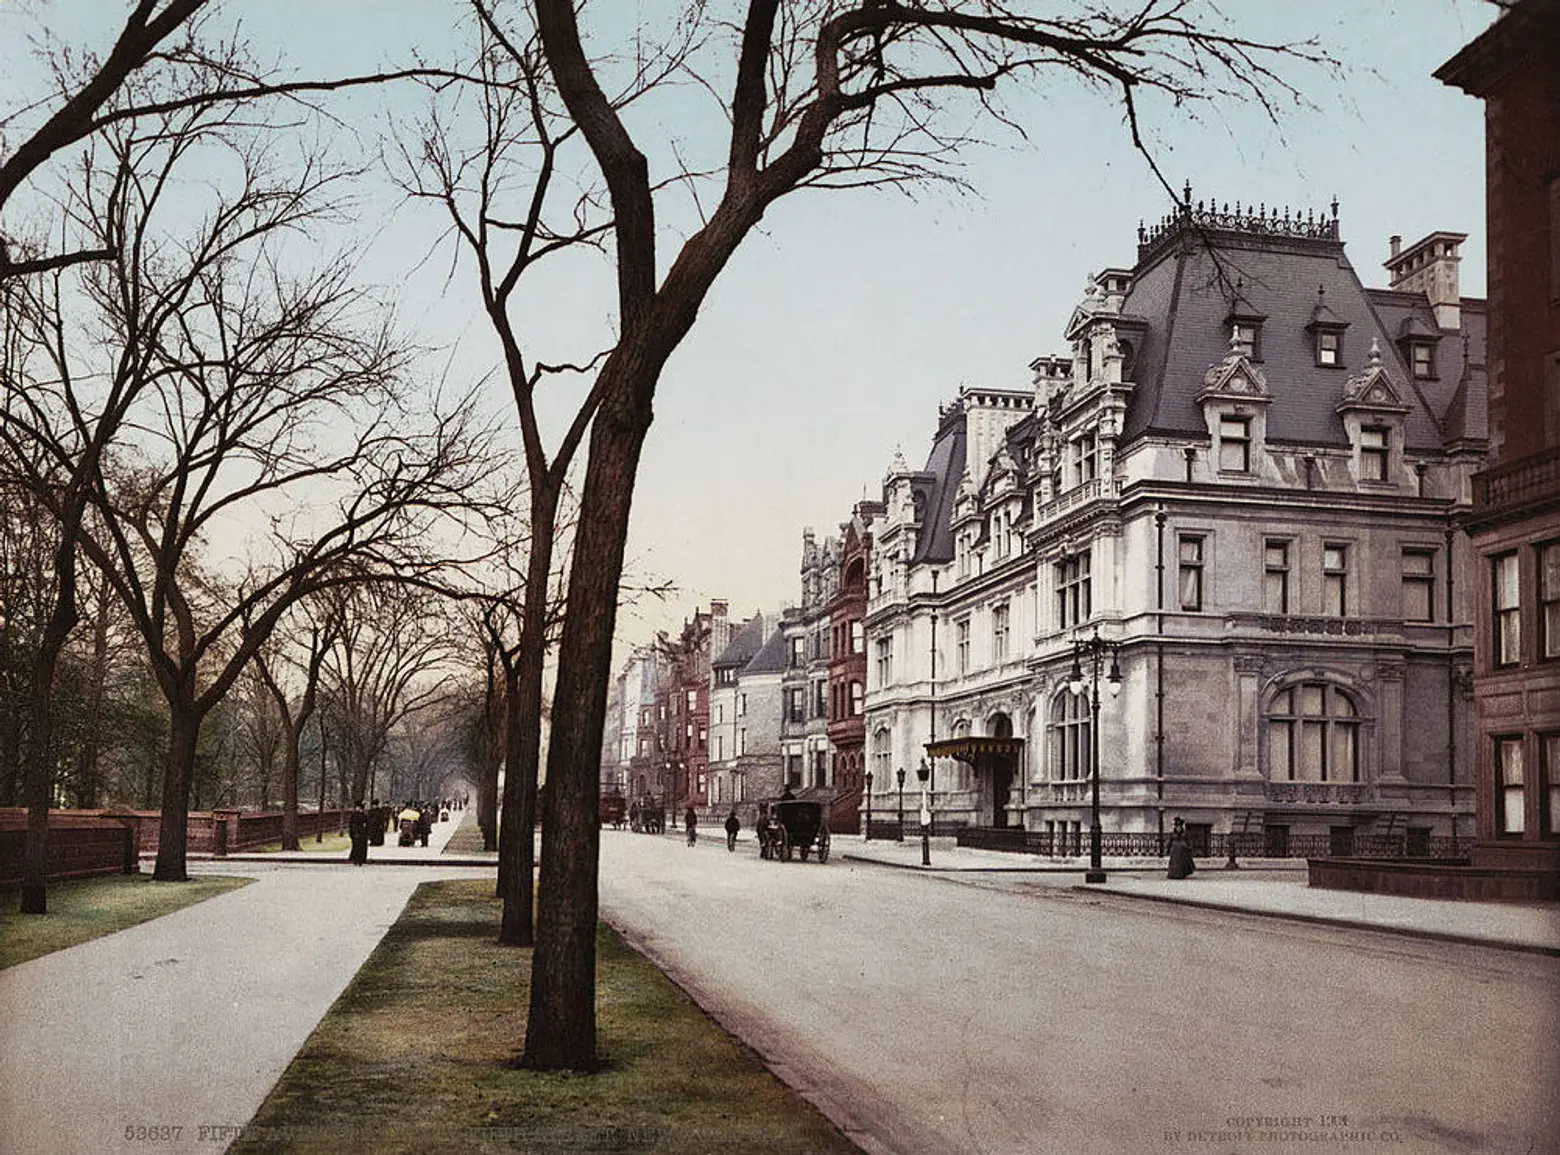 Two Centuries Later, Fifth Avenue is Still the Most Coveted Street